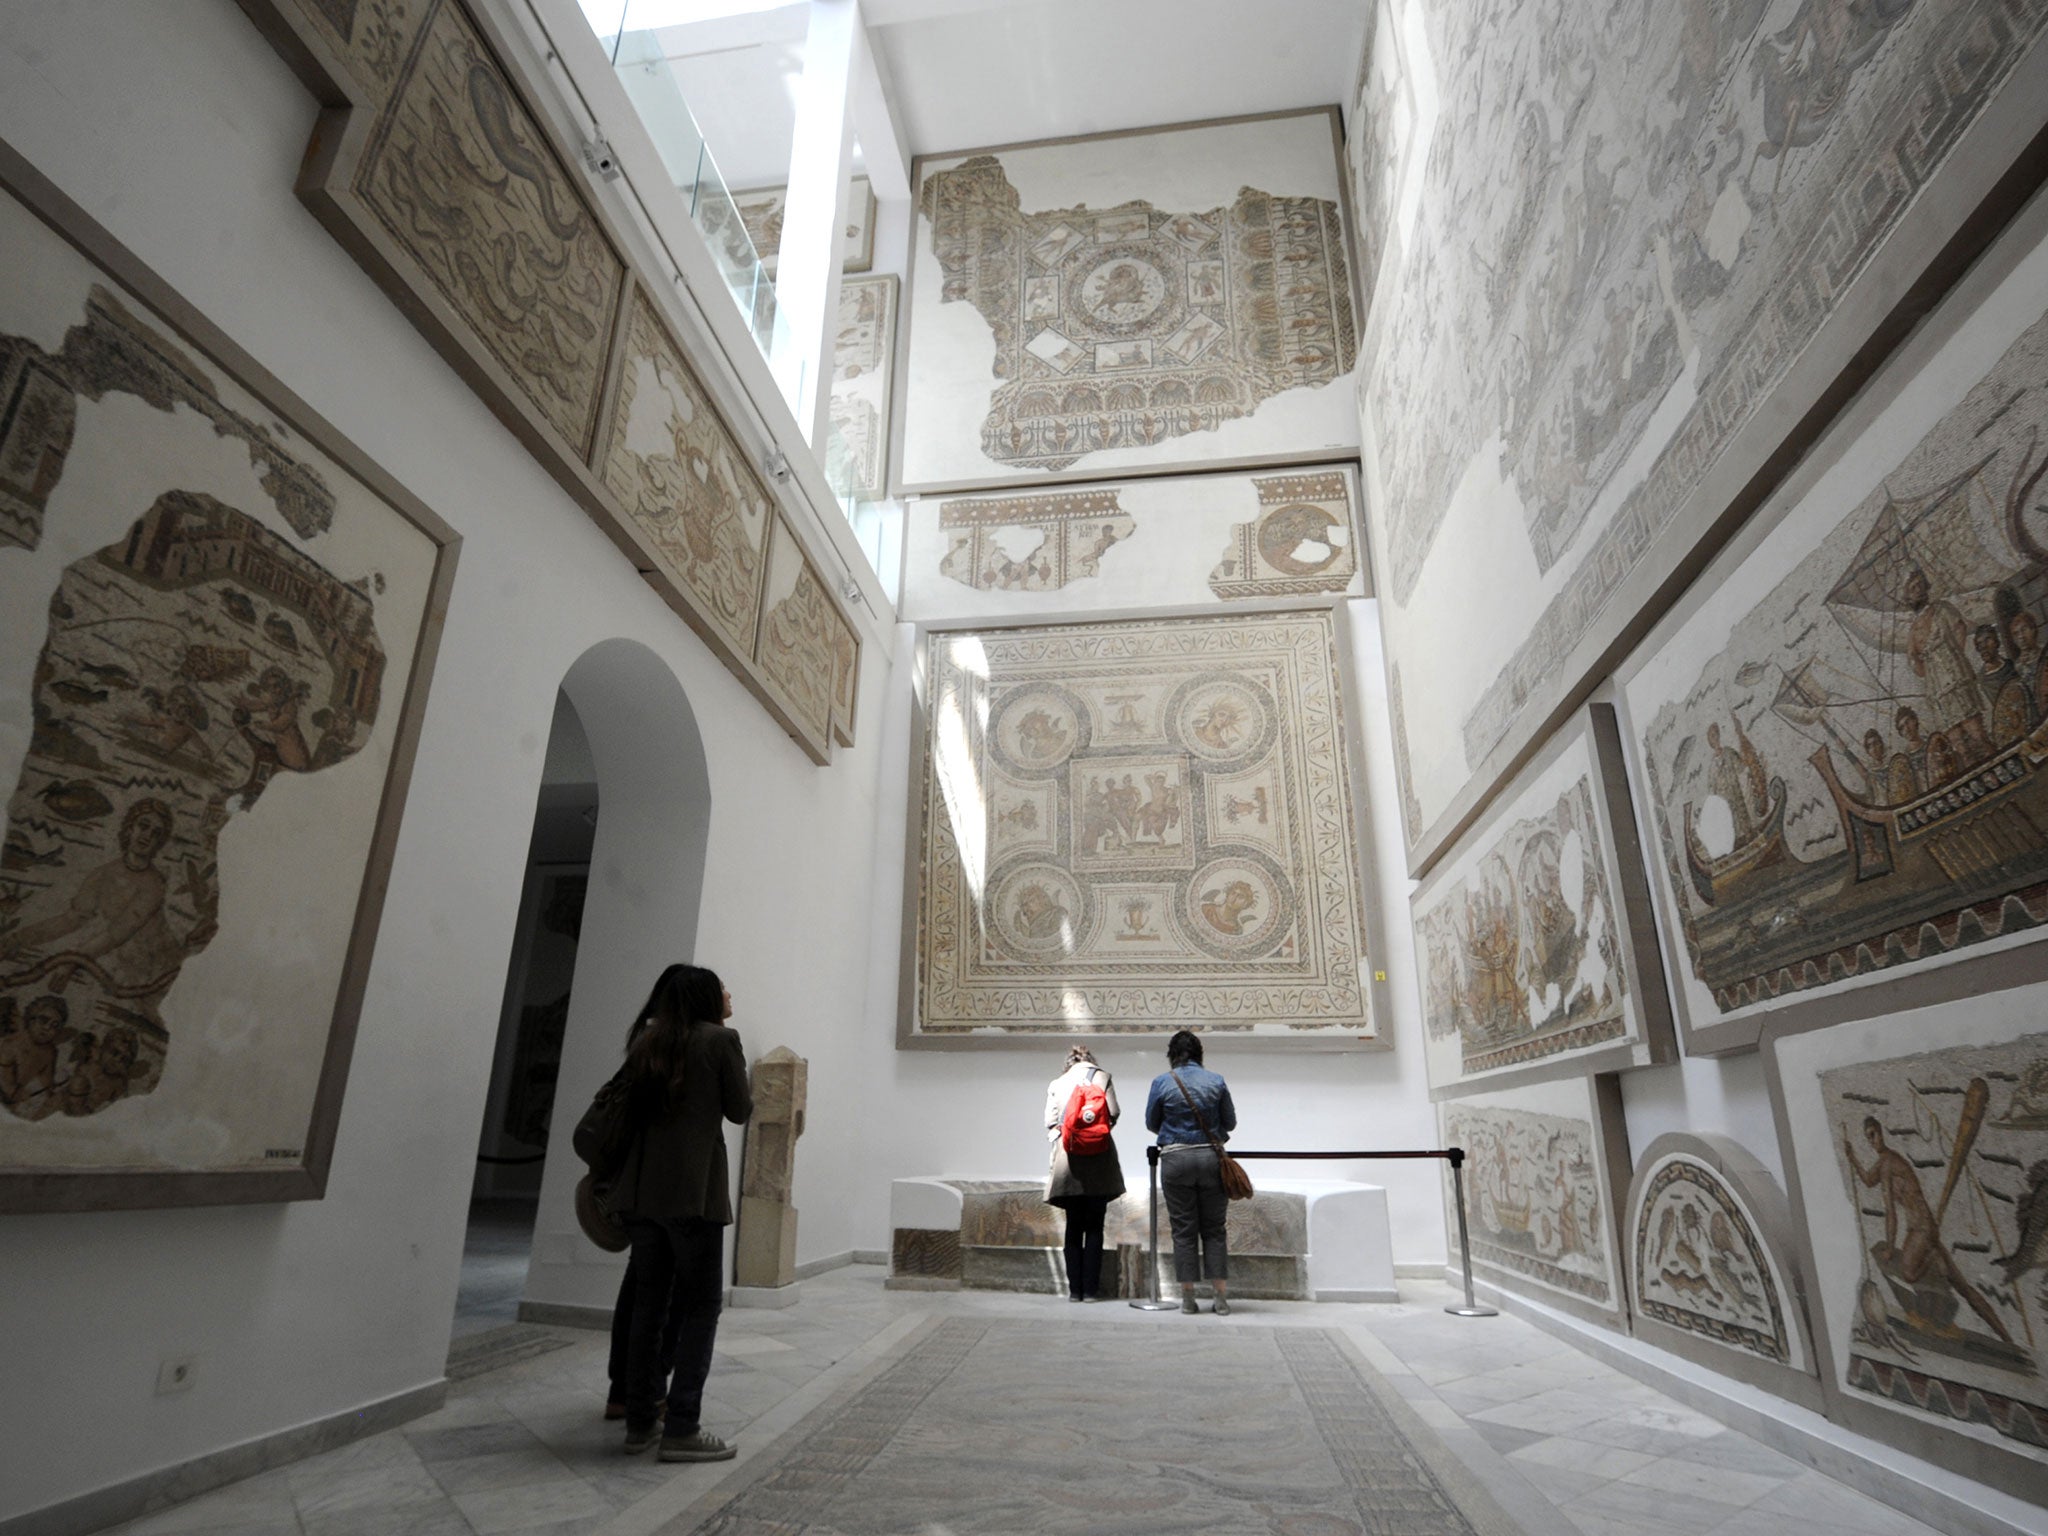 The Bardo Museum in Tunis, famous for its exceptional collection of mosaics